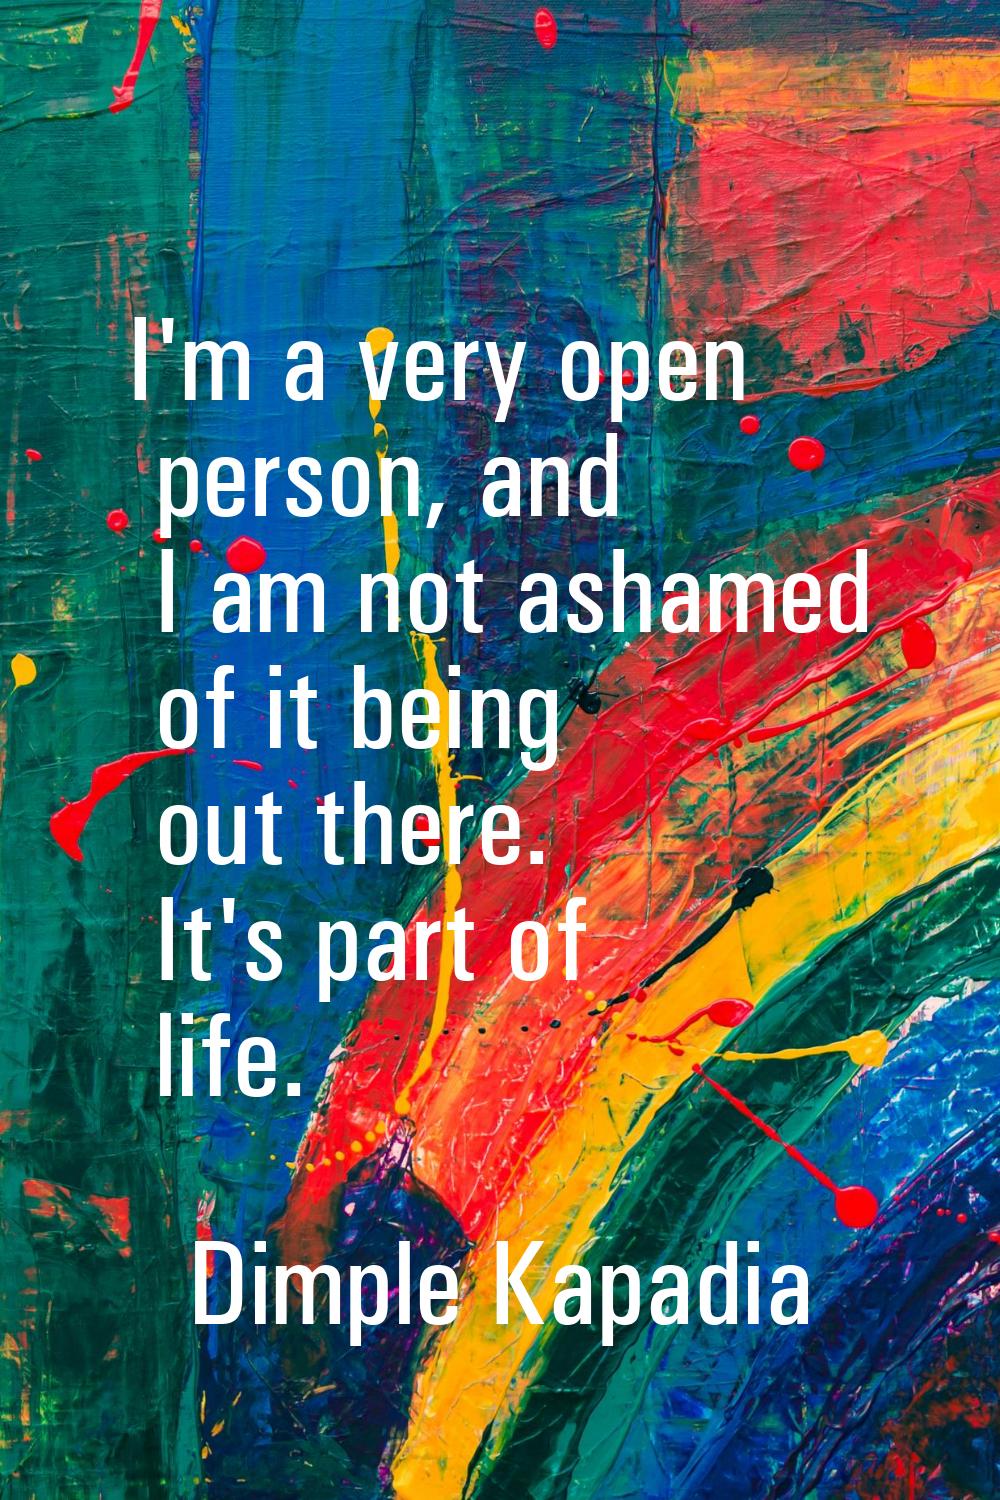 I'm a very open person, and I am not ashamed of it being out there. It's part of life.